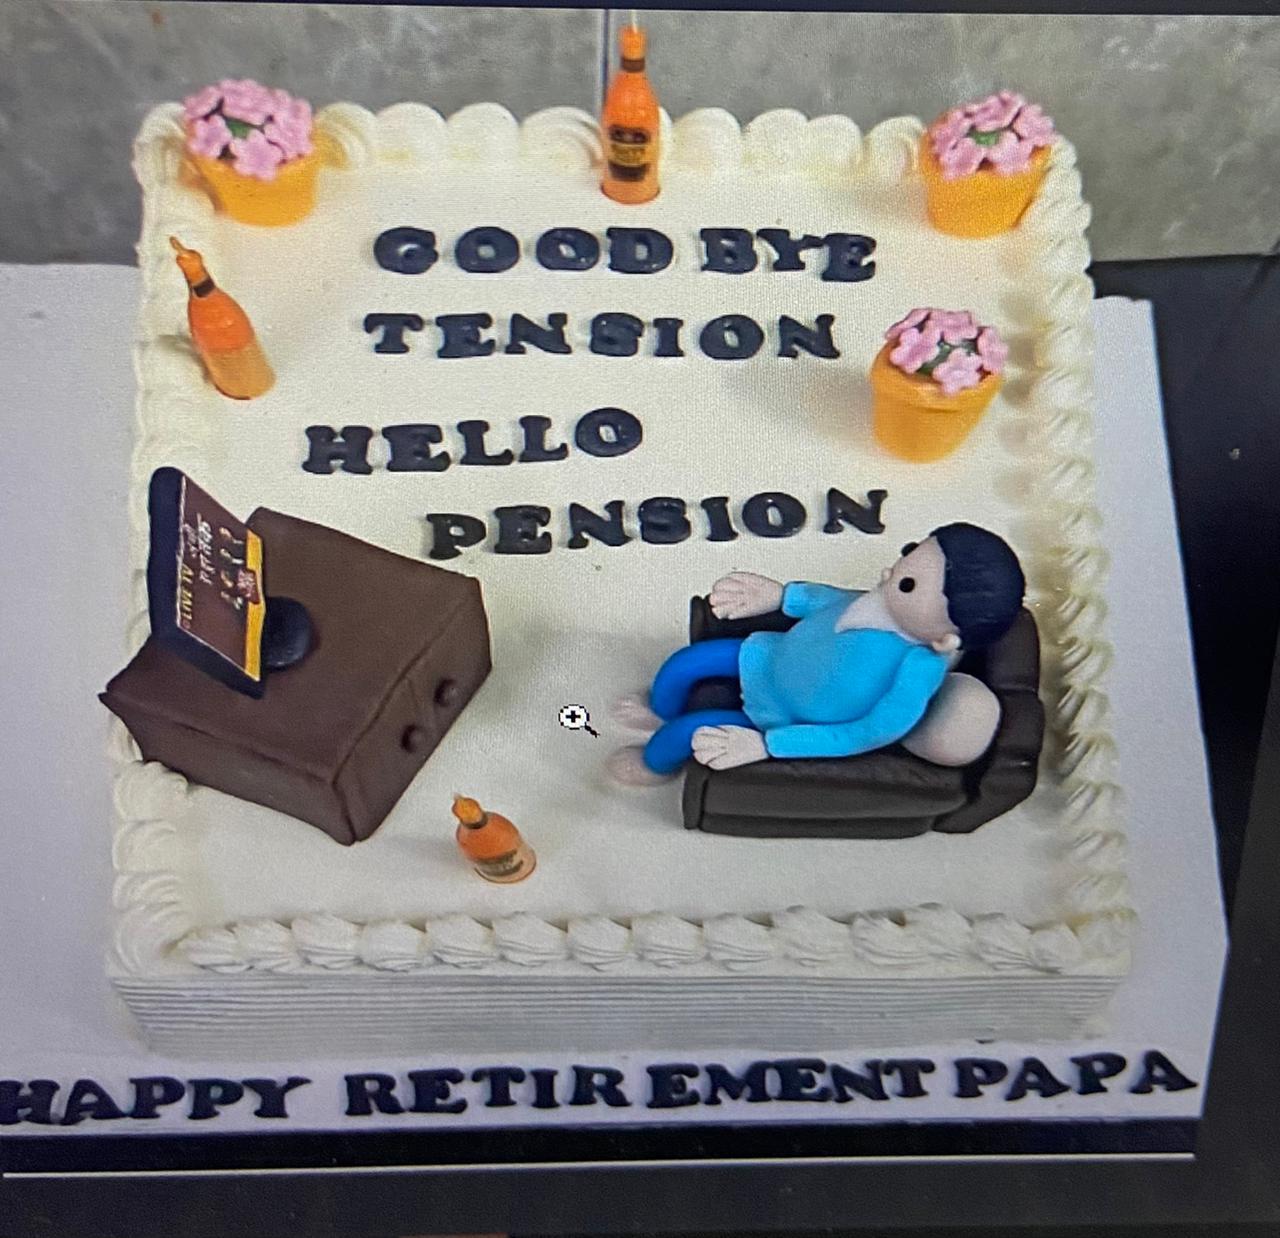 Top 999+ retirement cake images – Amazing Collection retirement cake images Full 4K